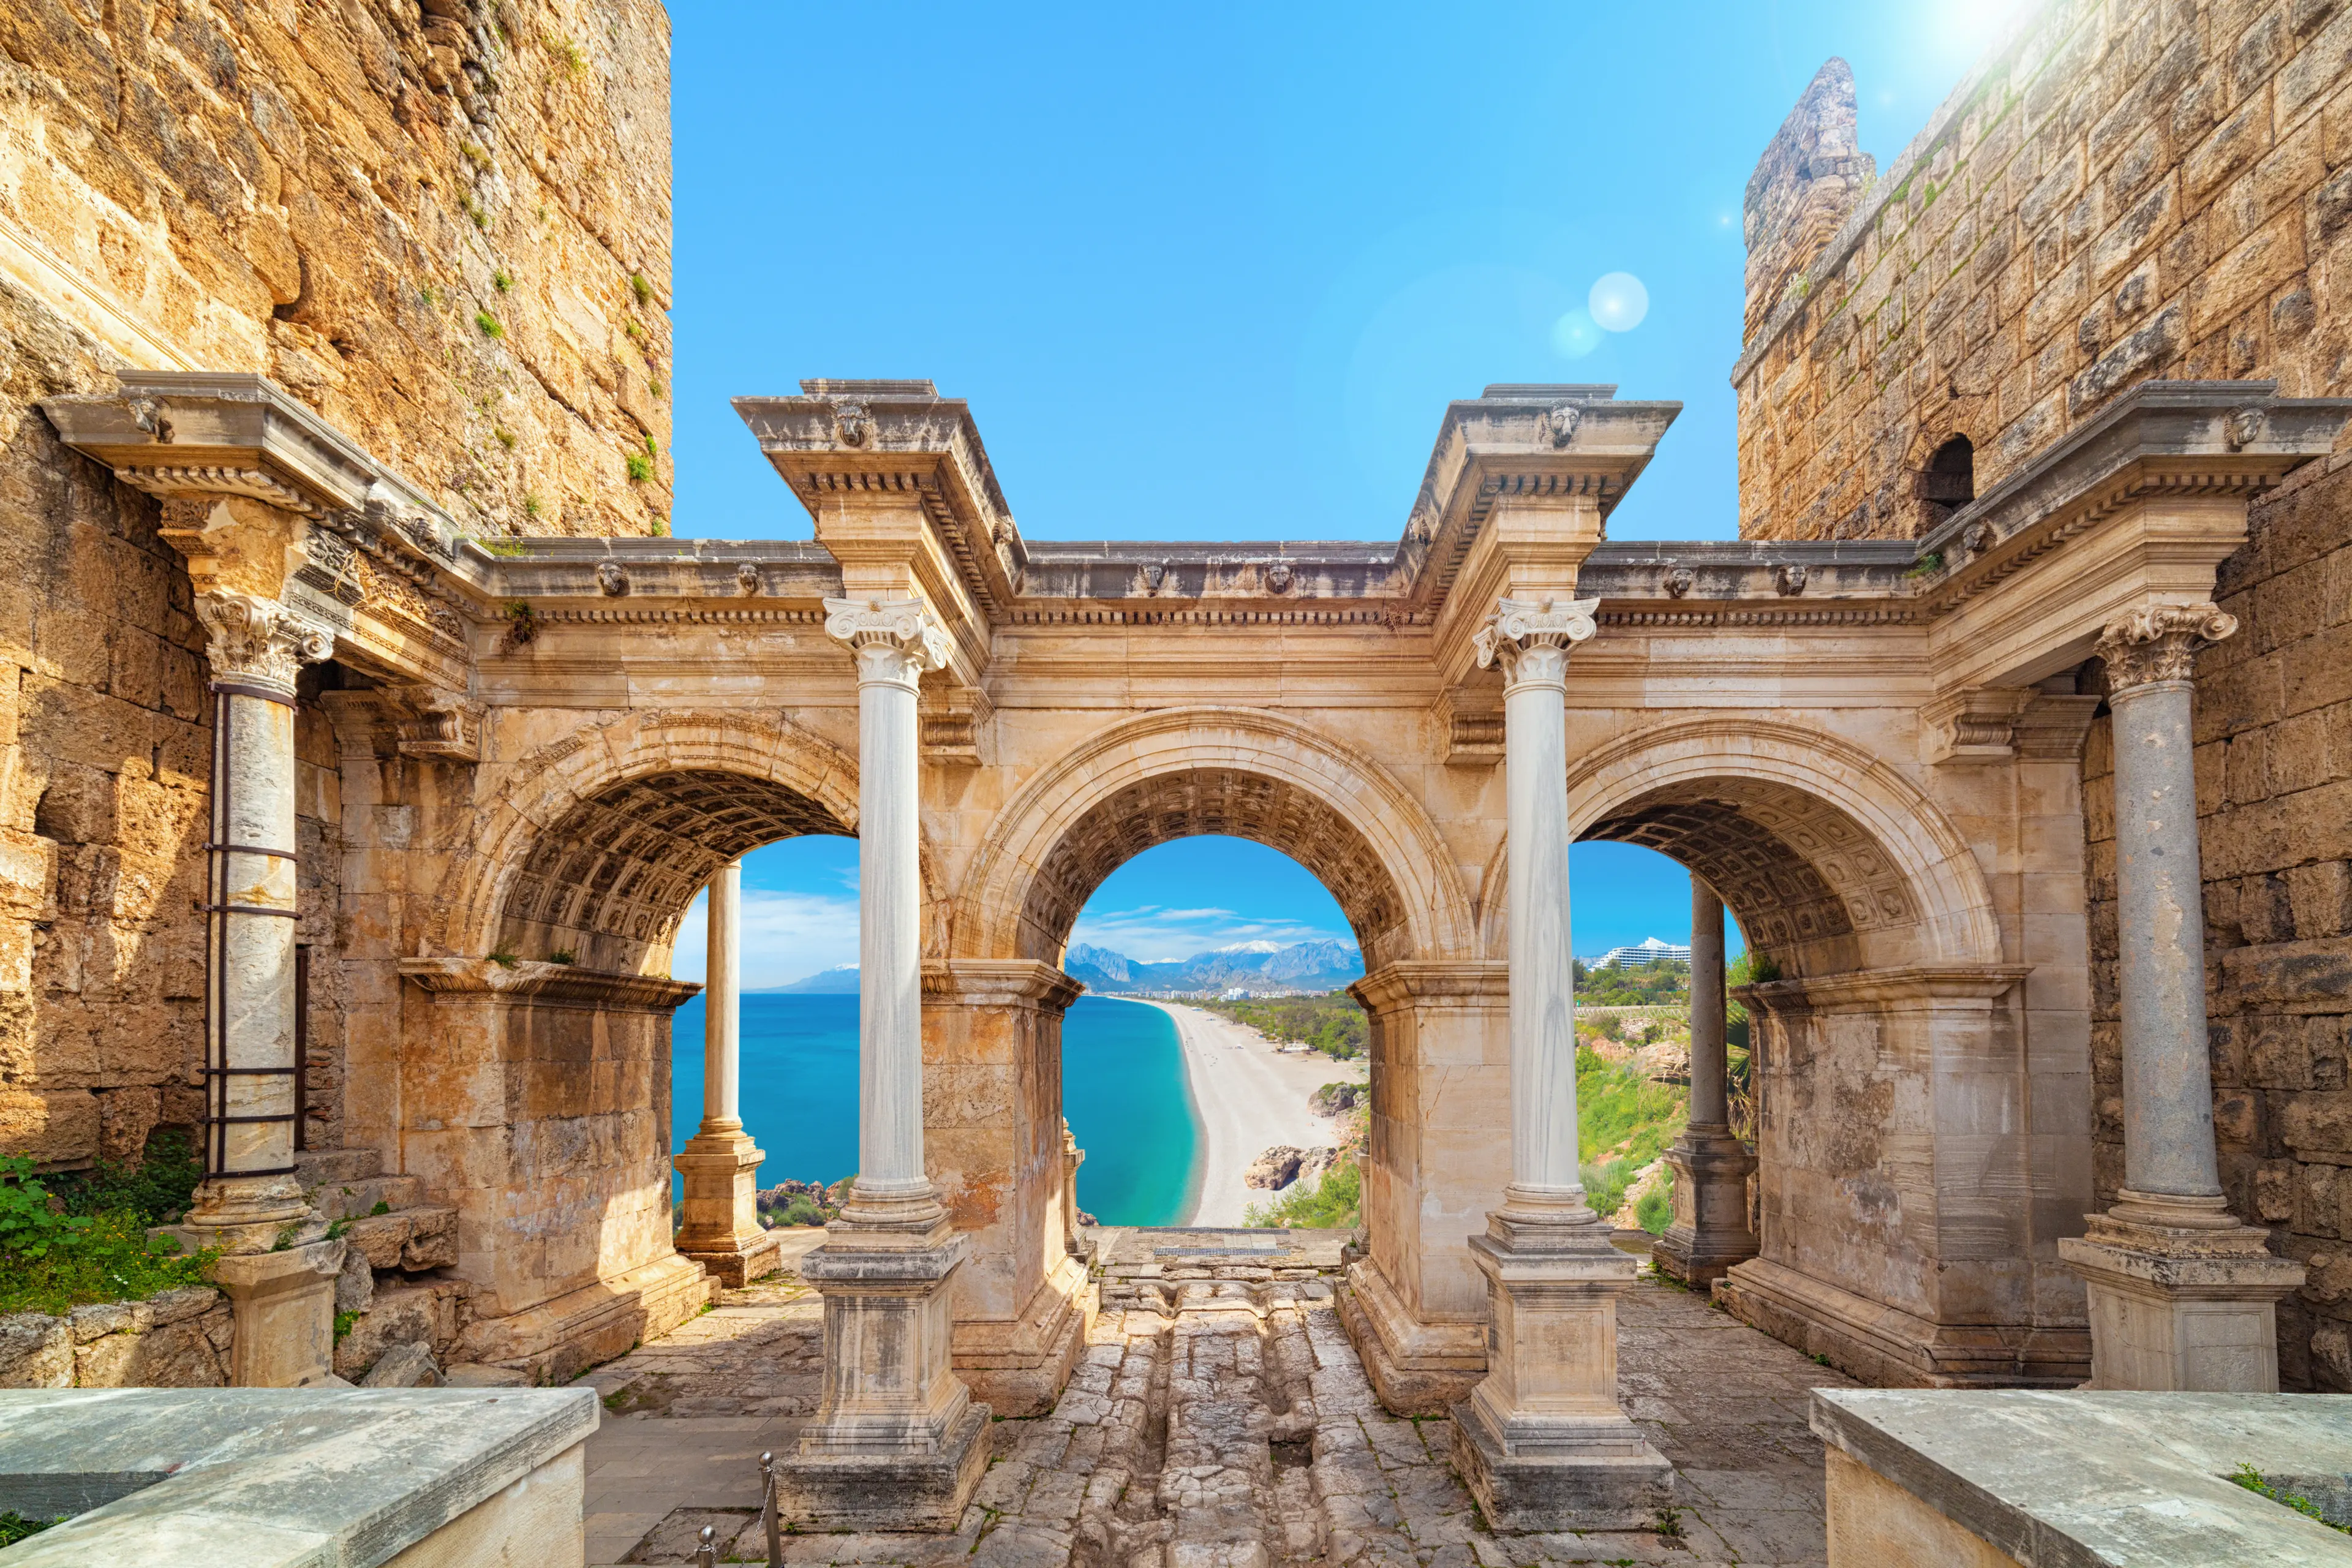 1-Day Antalya Family Vacation: Relaxation and Sightseeing Itinerary